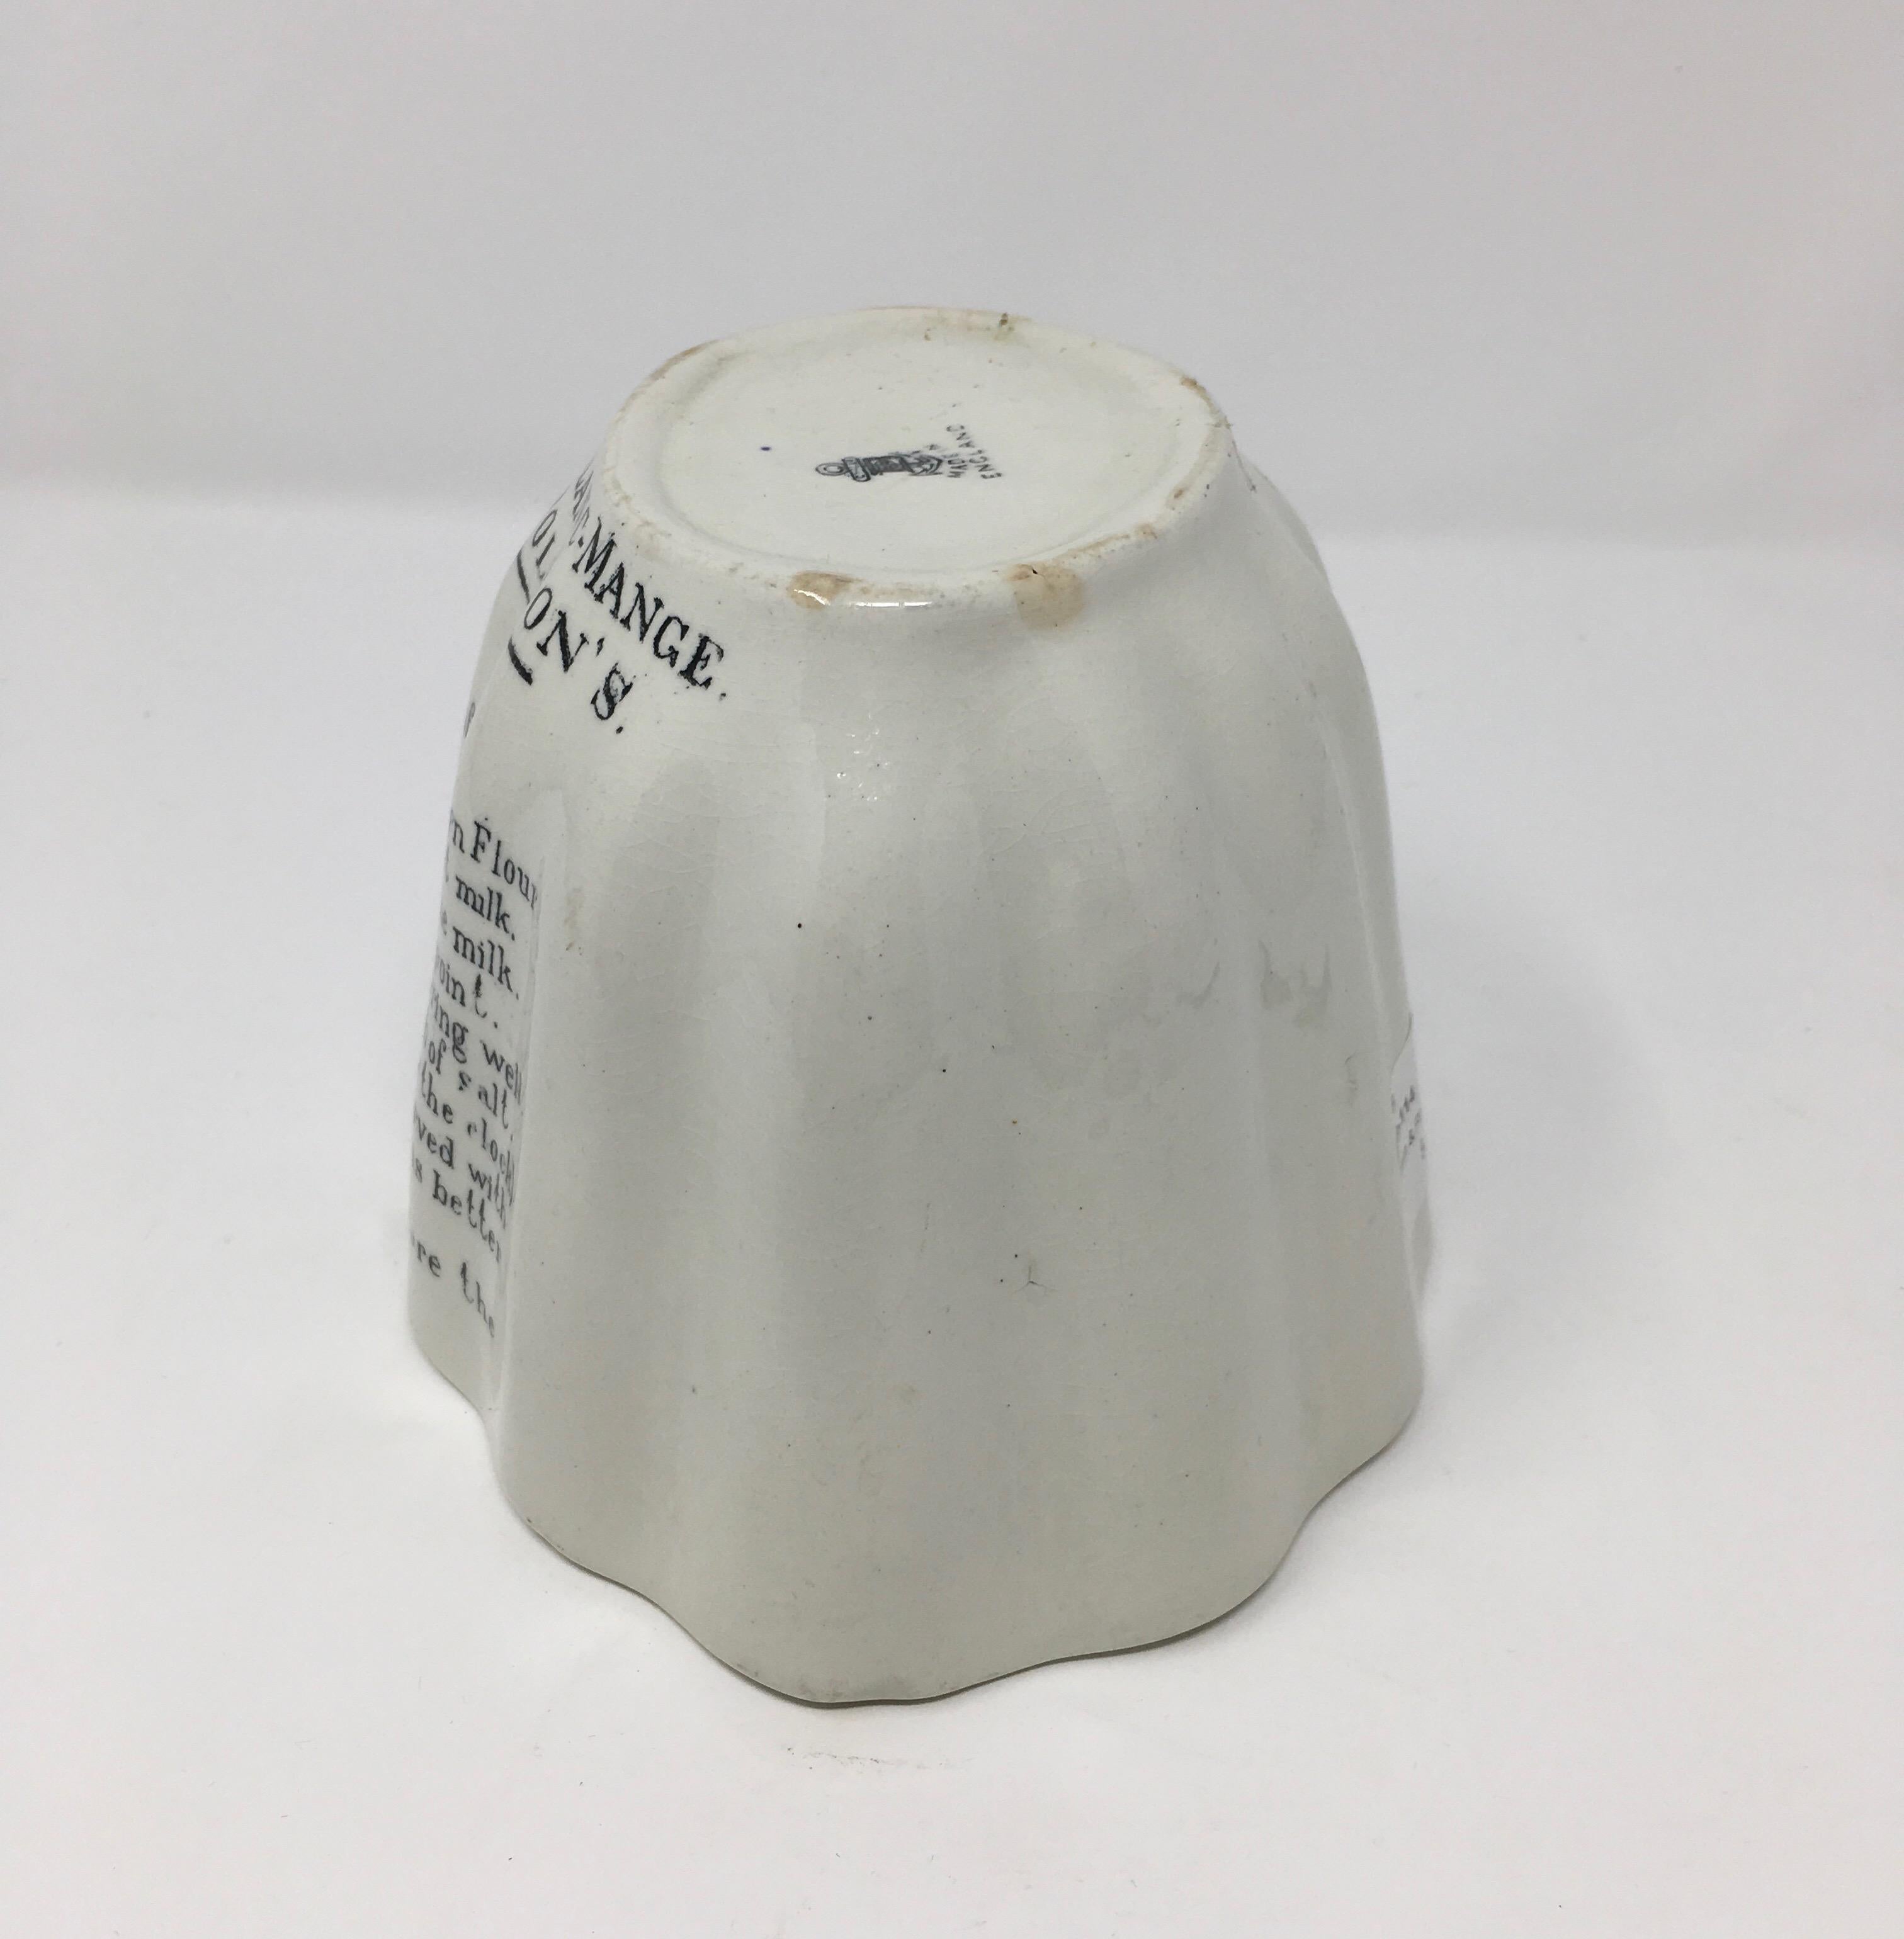 Antique Brown & Polson's Corn Flour Blanc-Mange pudding mold. This antique stoneware mold has a recipe for Corn Flour Blanc- Mange from Brown & Polson's on the side. Blanc-Mange is a sweet desert commonly made with milk or cream and sugar thickened